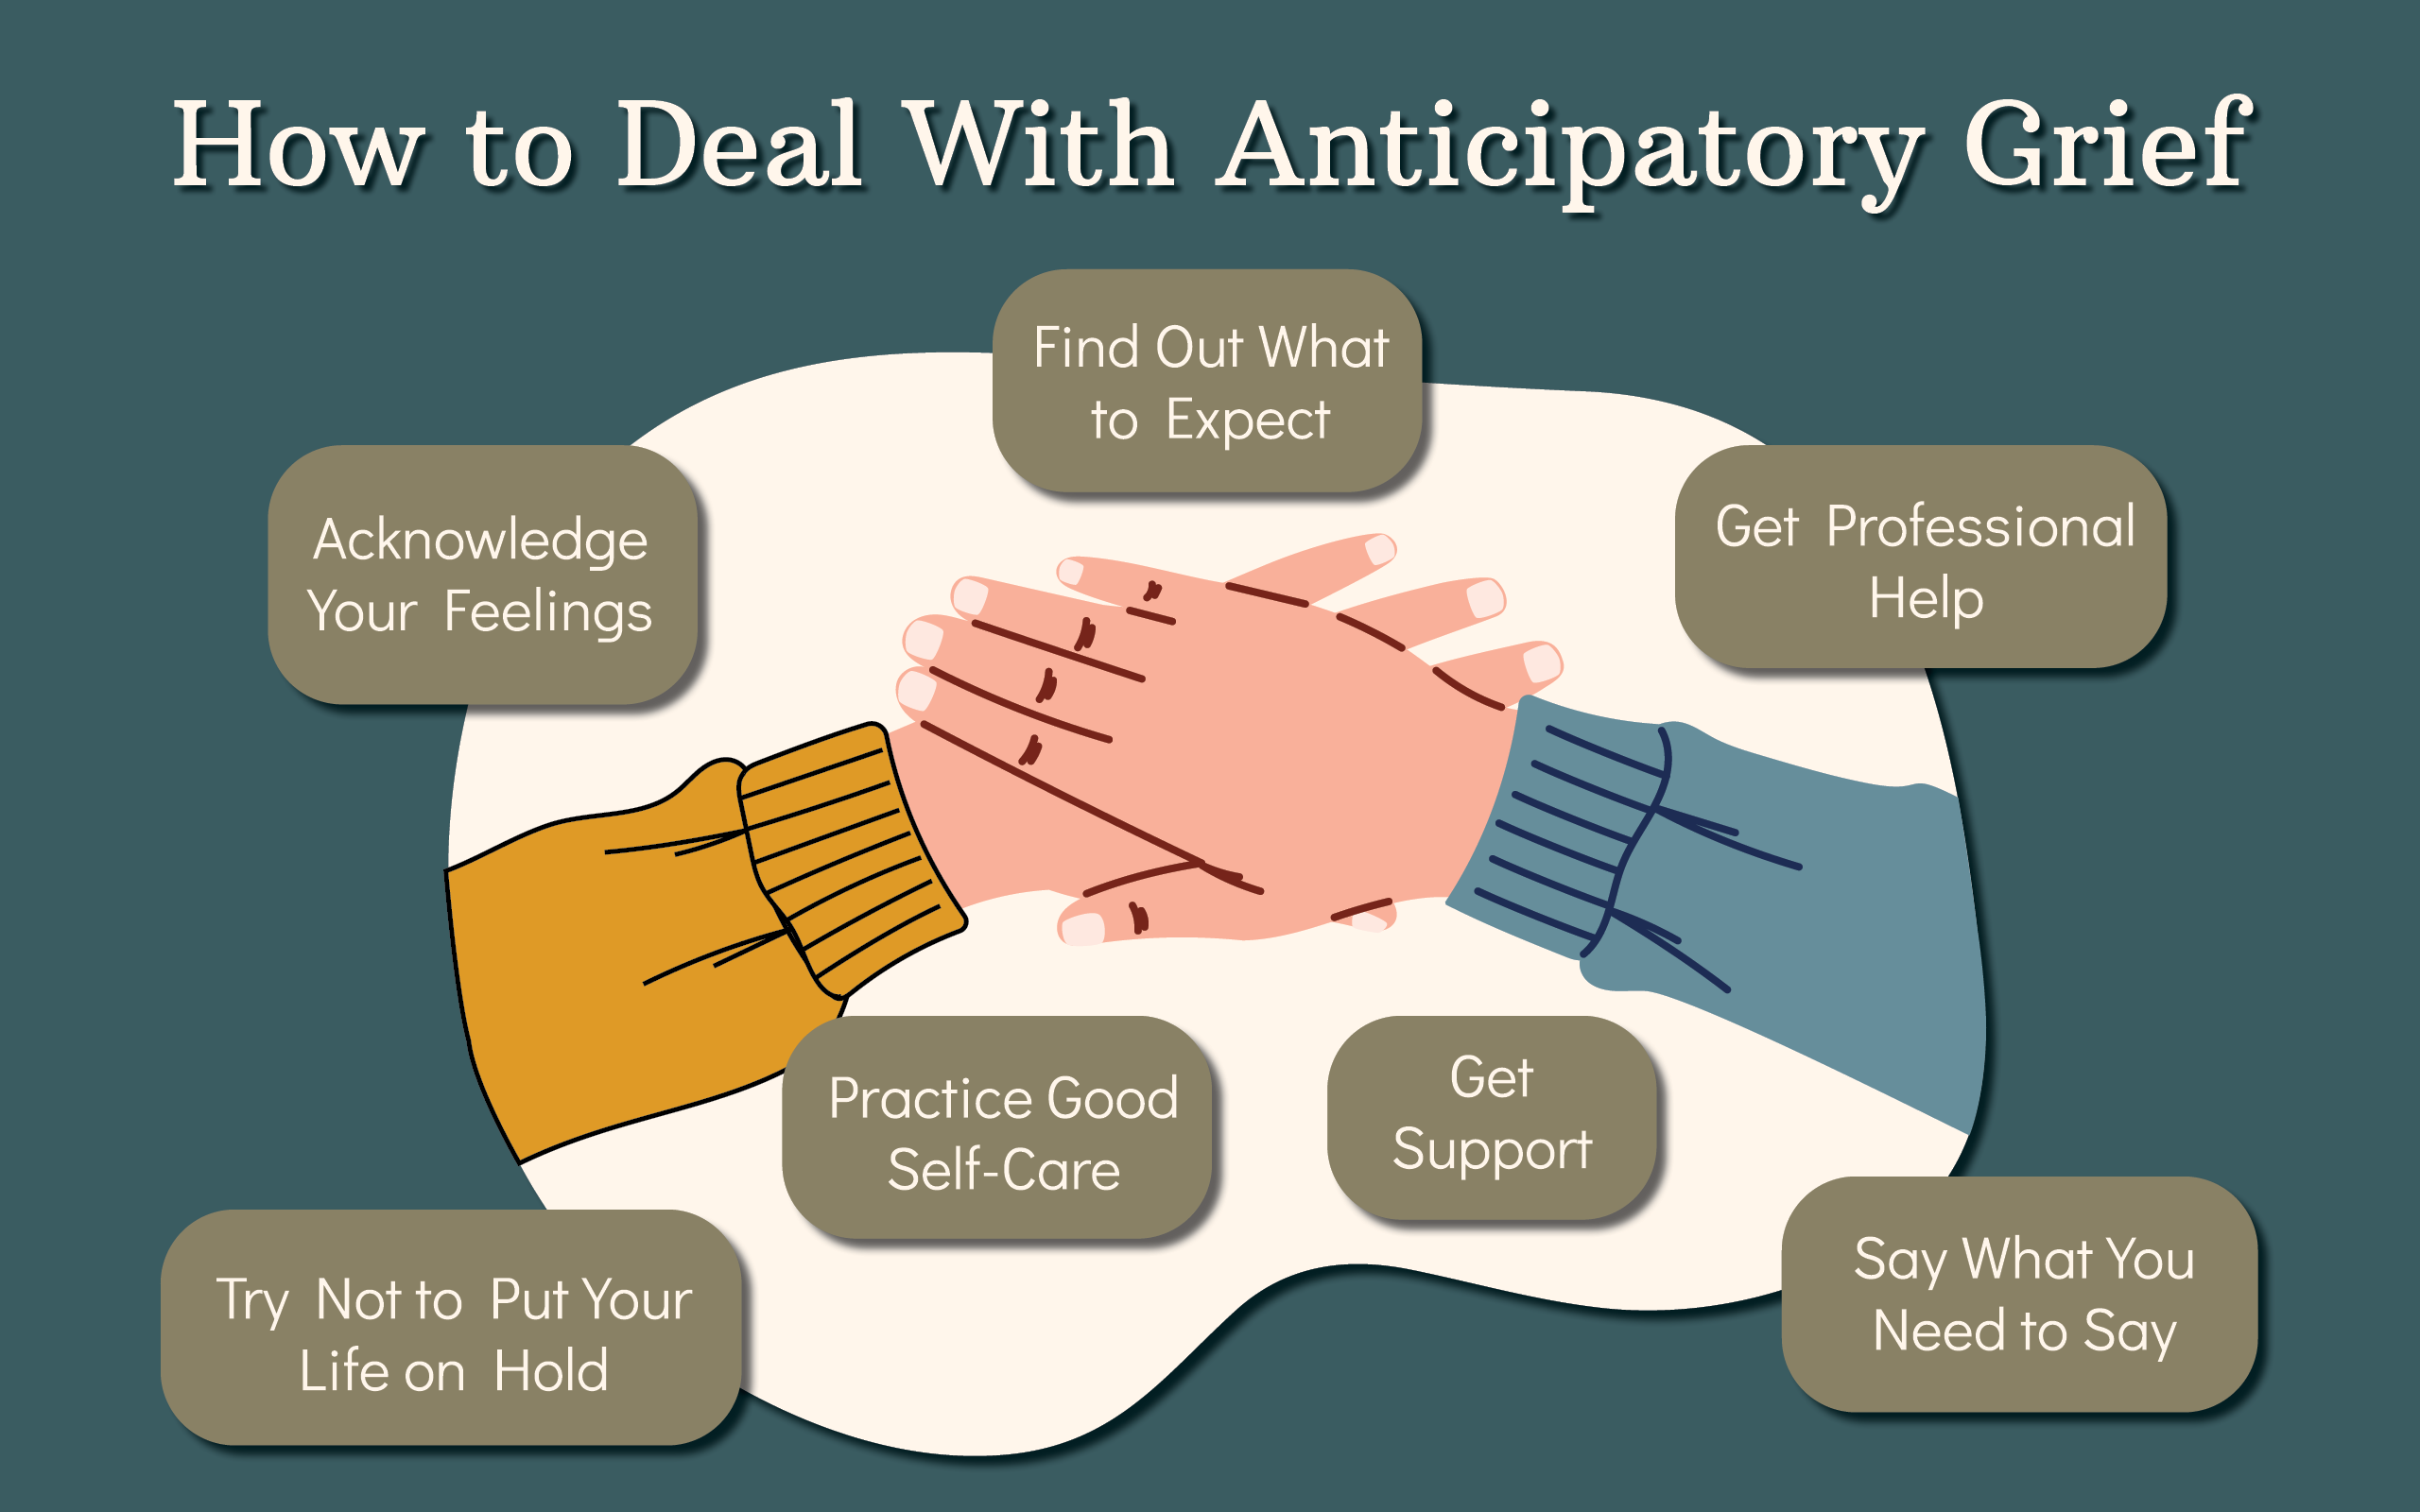 How to Deal With Anticipatory Grief